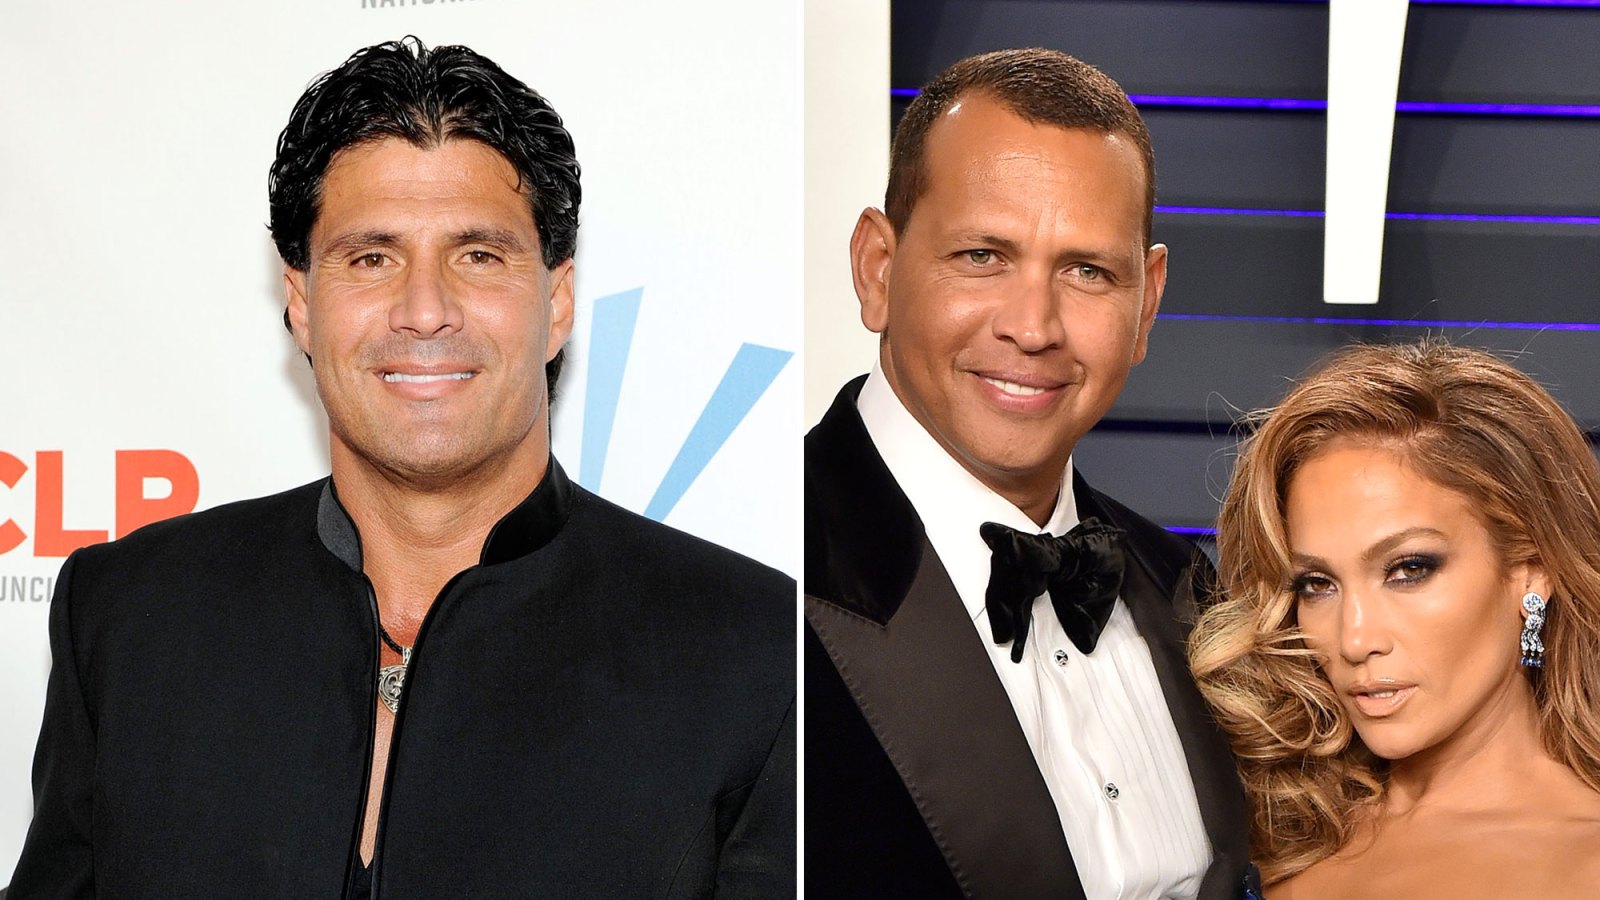 Jose Canseco Challenges Alex Rodriguez to a Polygraph Test